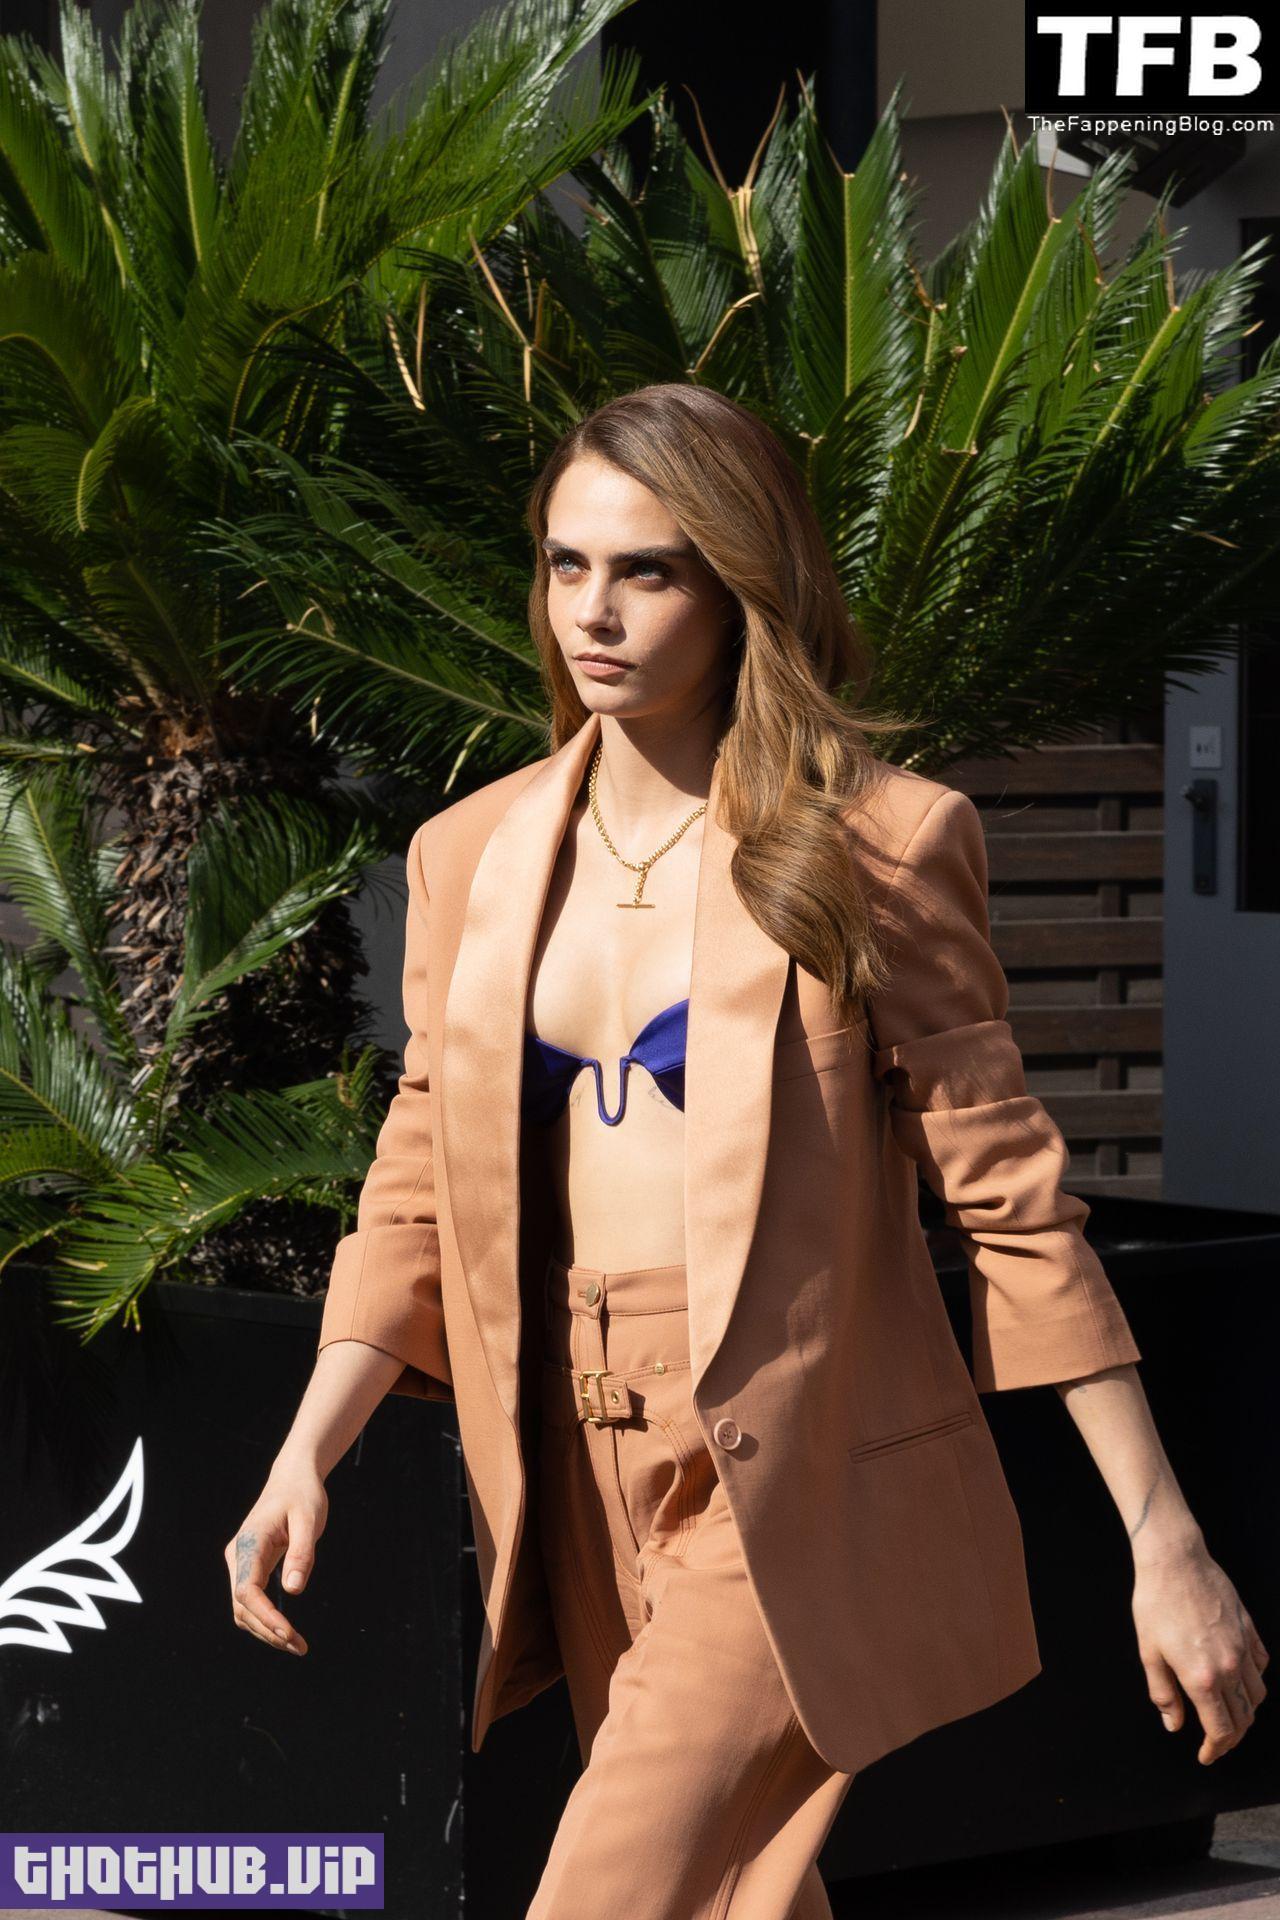 Cara Delevingne Sexy The Fappening Blog 43 1